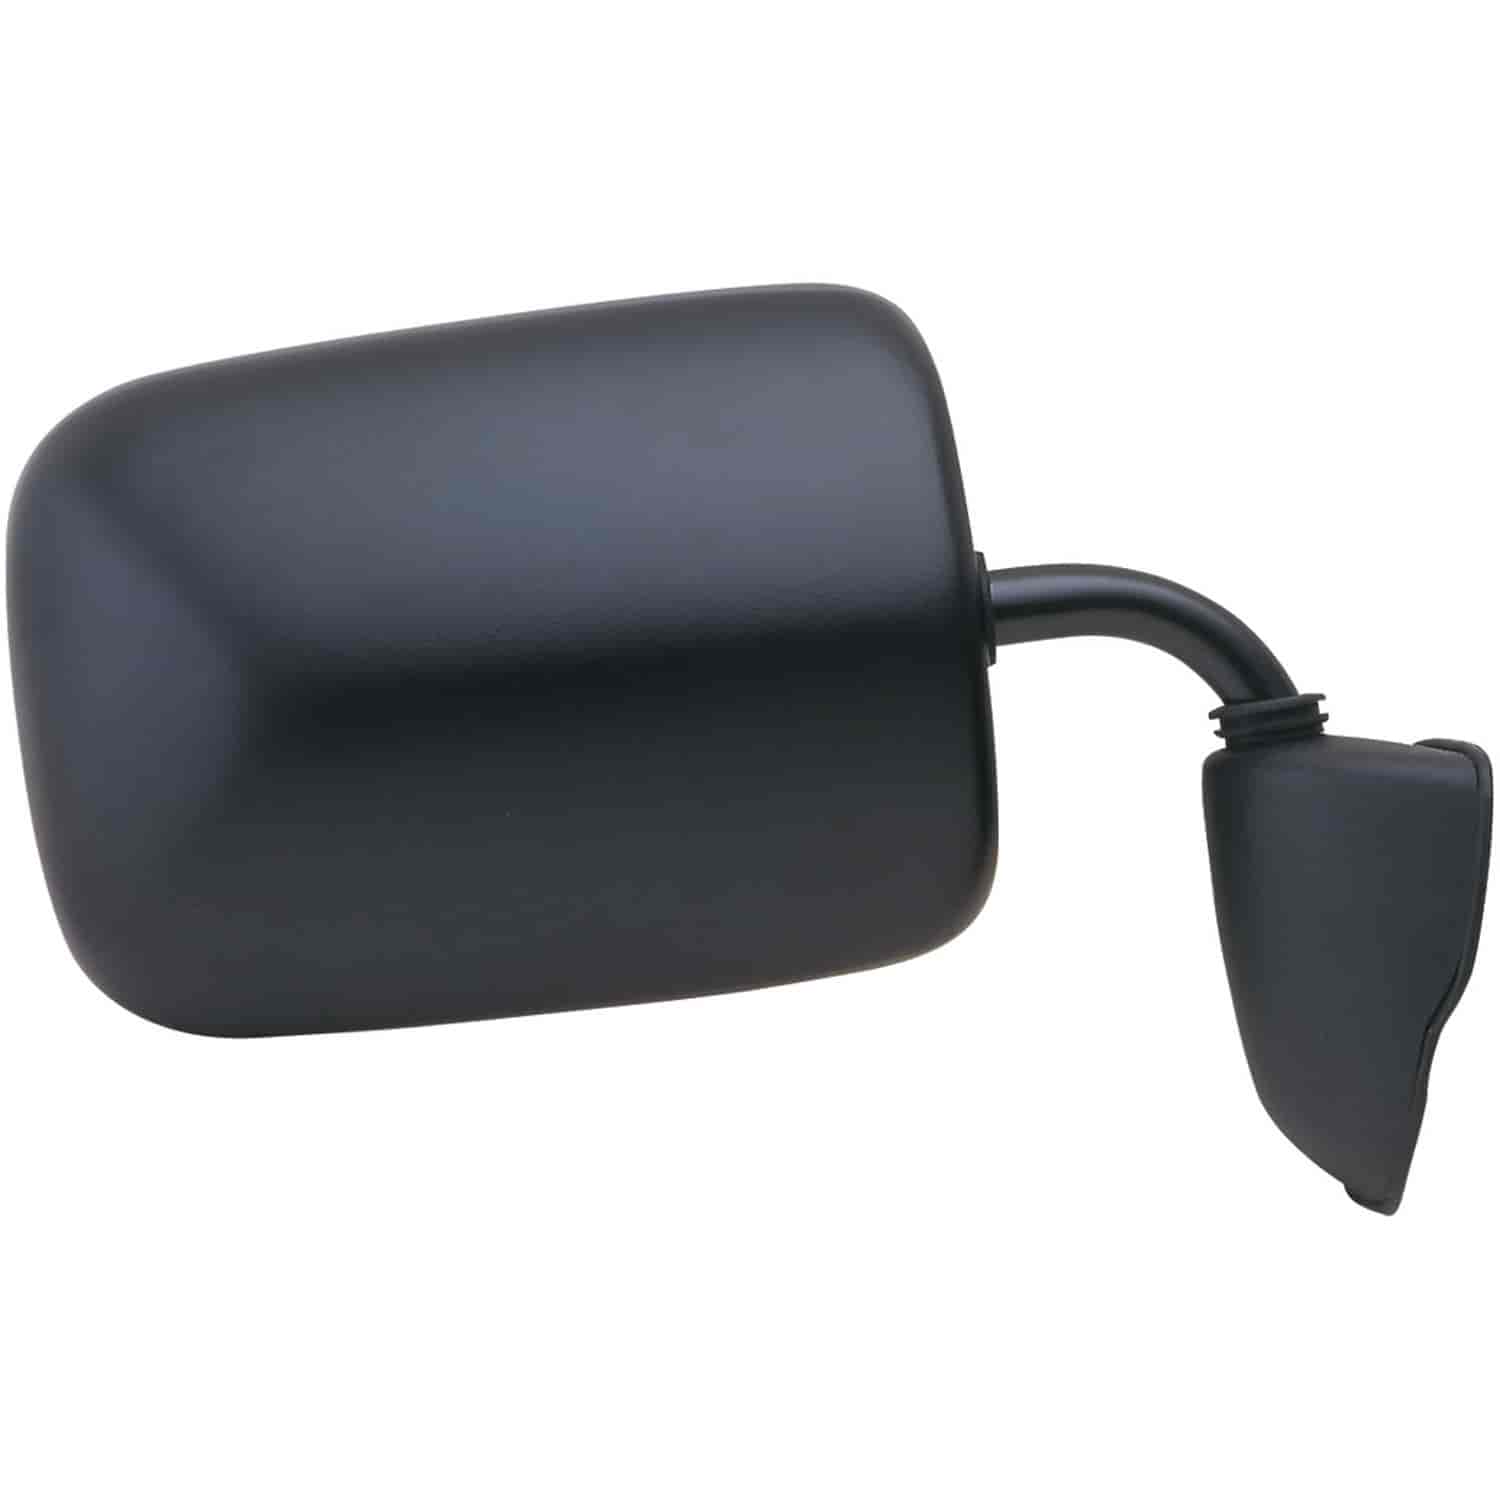 OEM Style Replacement mirror for 93-97 Dodge Full Size Van passenger side mirror tested to fit and f